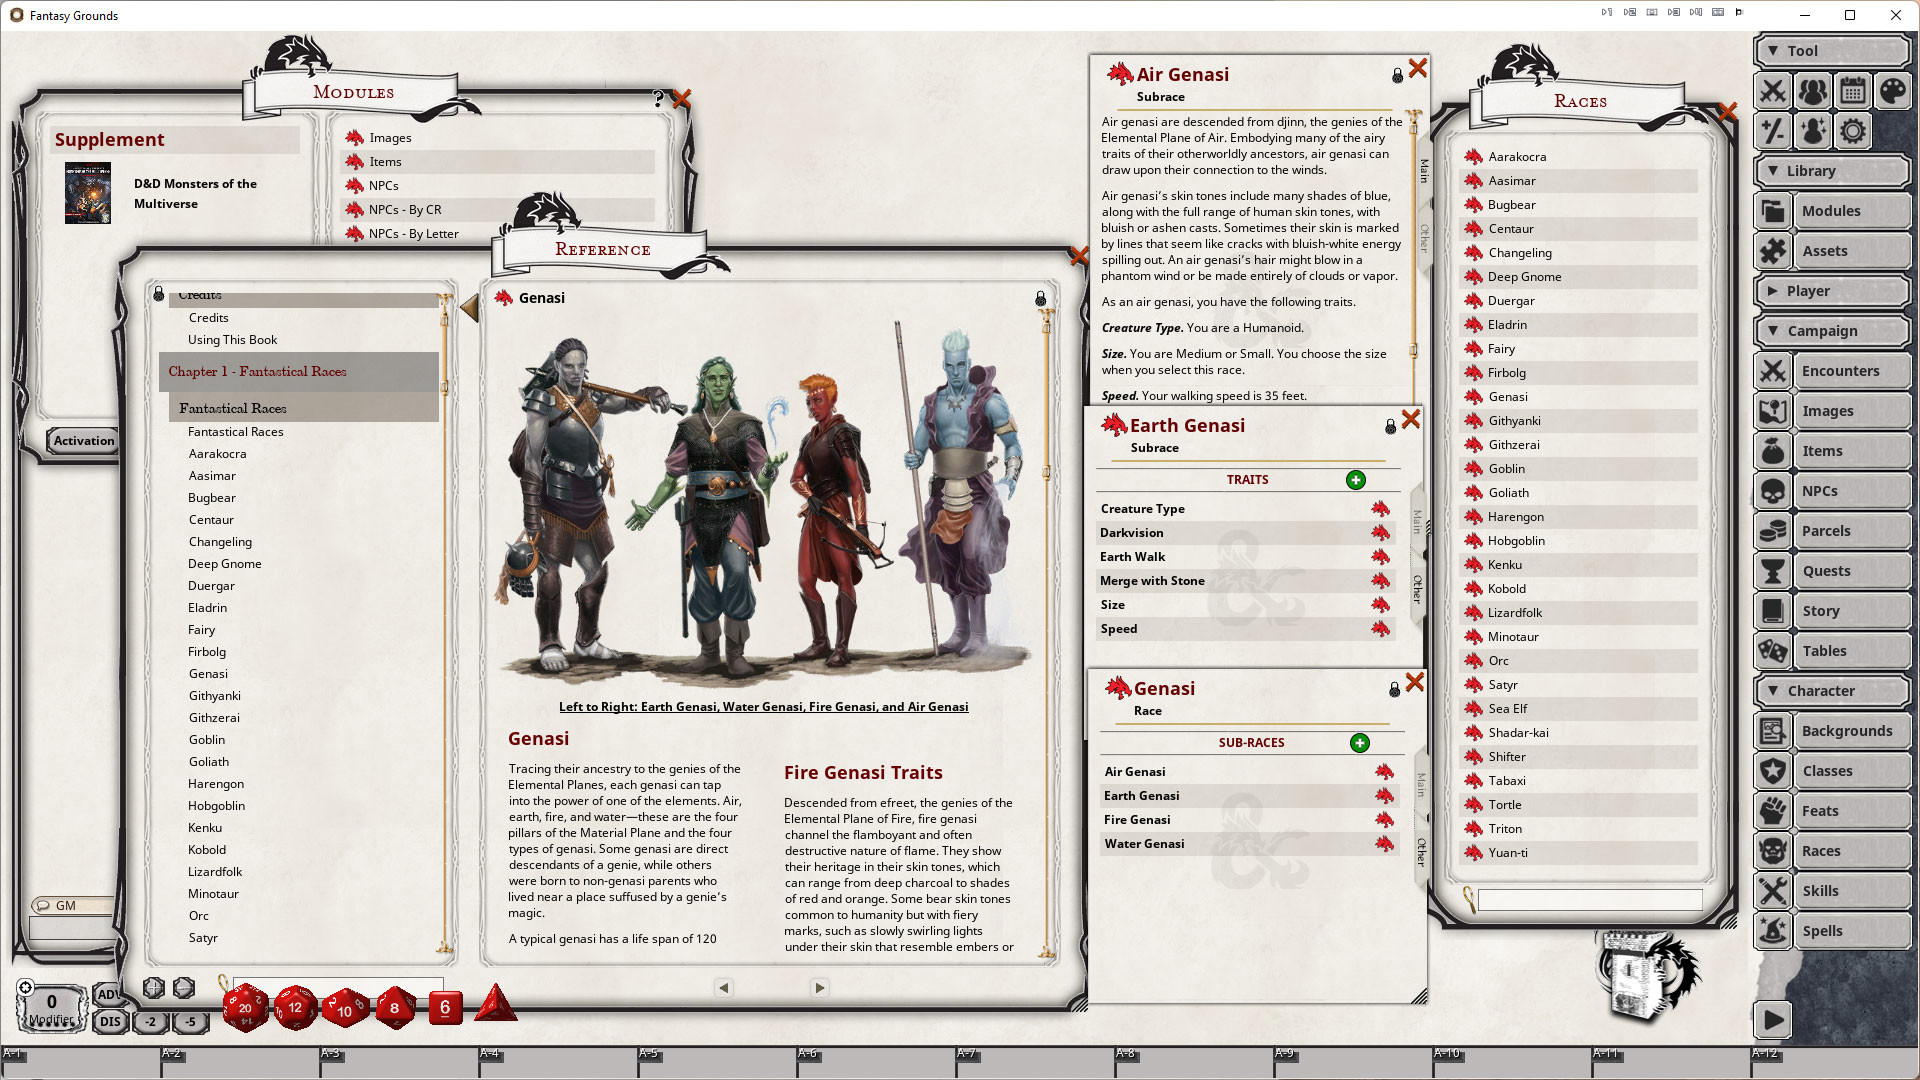 Fantasy Grounds - D&D Mordenkainen Presents Monsters of the Multiverse Featured Screenshot #1